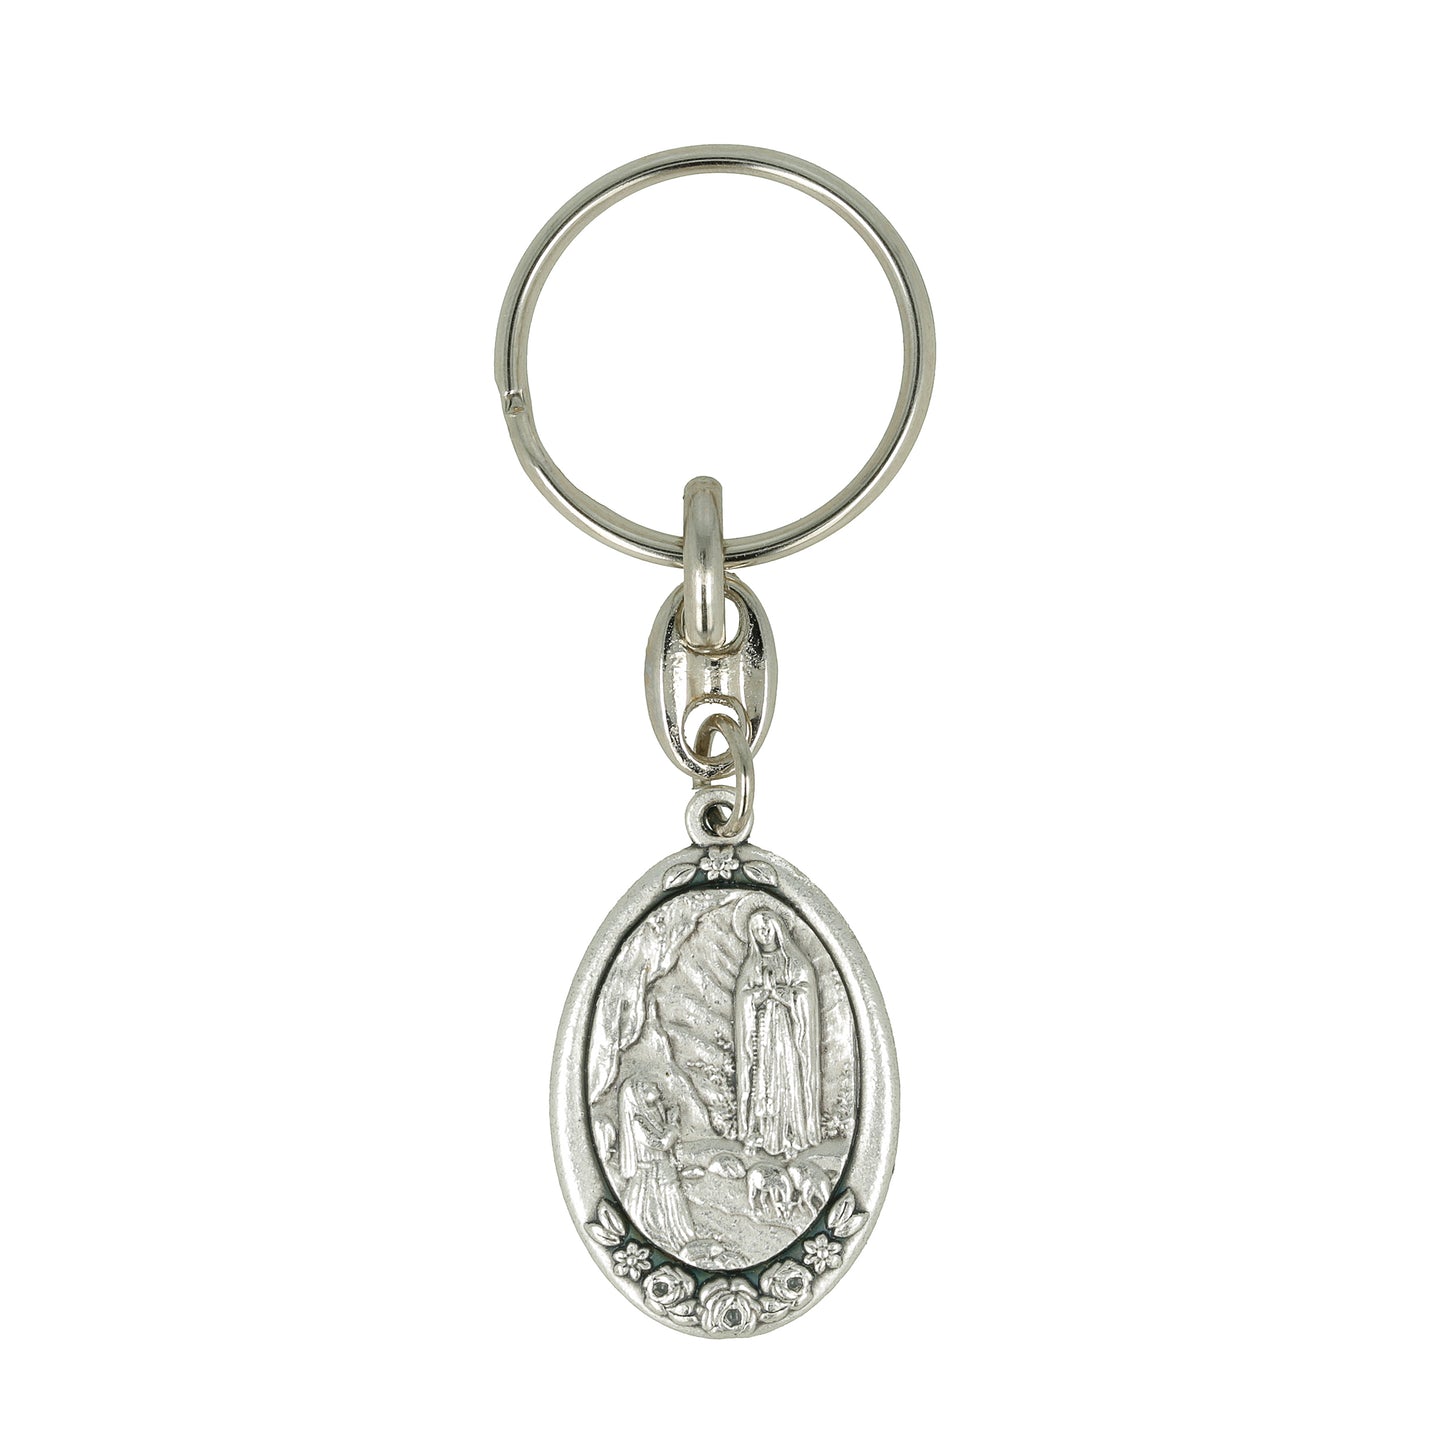 Keychain Our Lady of Lourdes Profile of Maria. Souvenirs from Italy